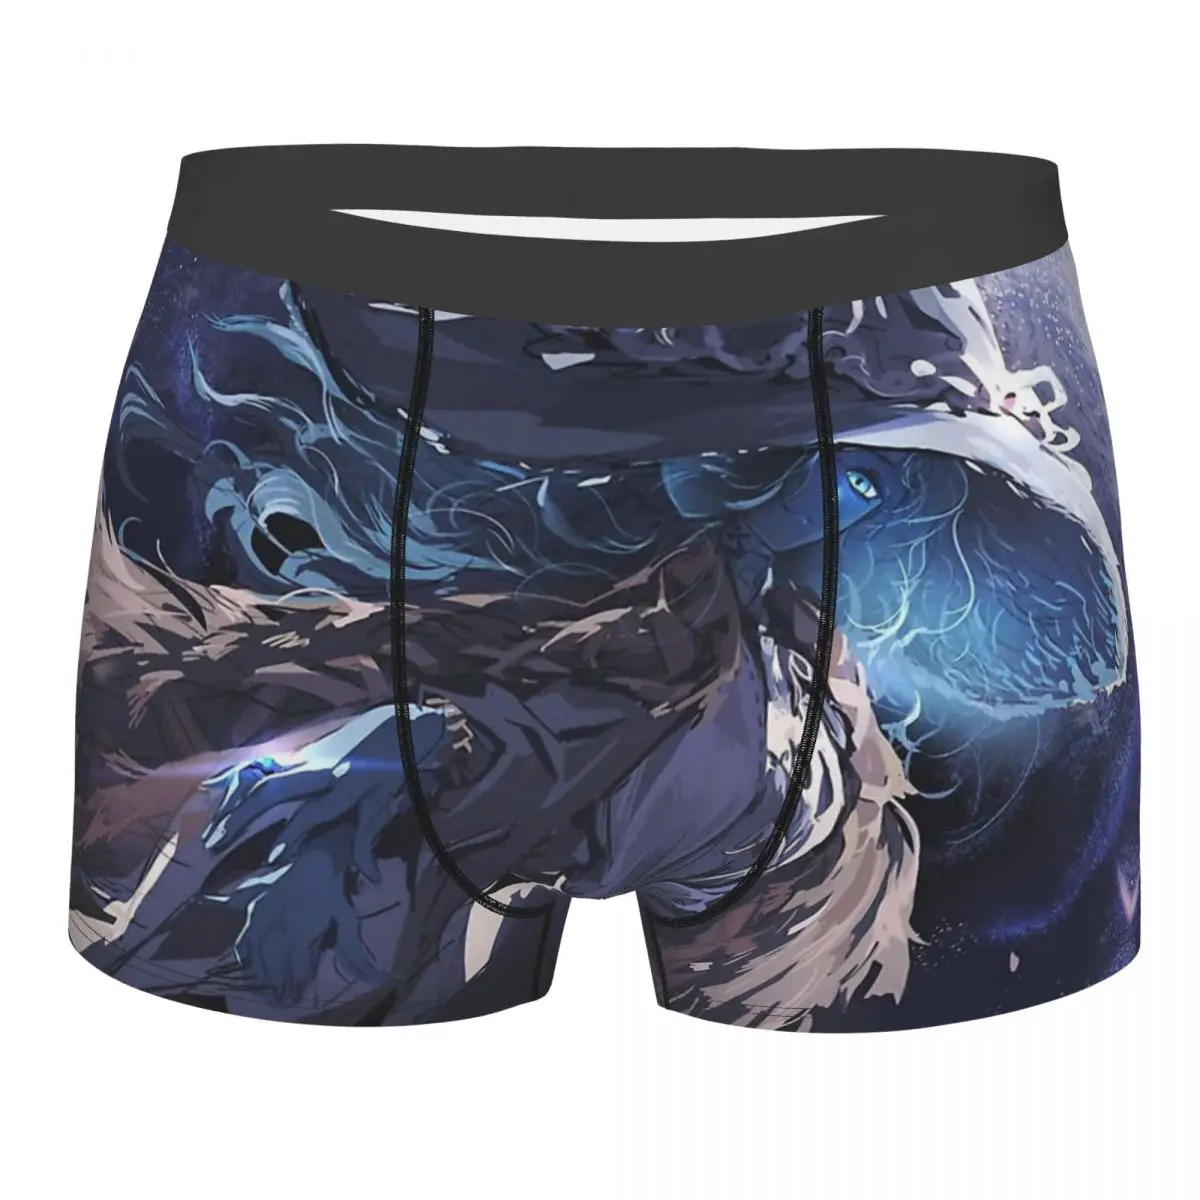 

Ranni The Witch Moon Light Elden Ring Steam Game Underpants Breathbale Panties Man Underwear Sexy Shorts Boxer Briefs